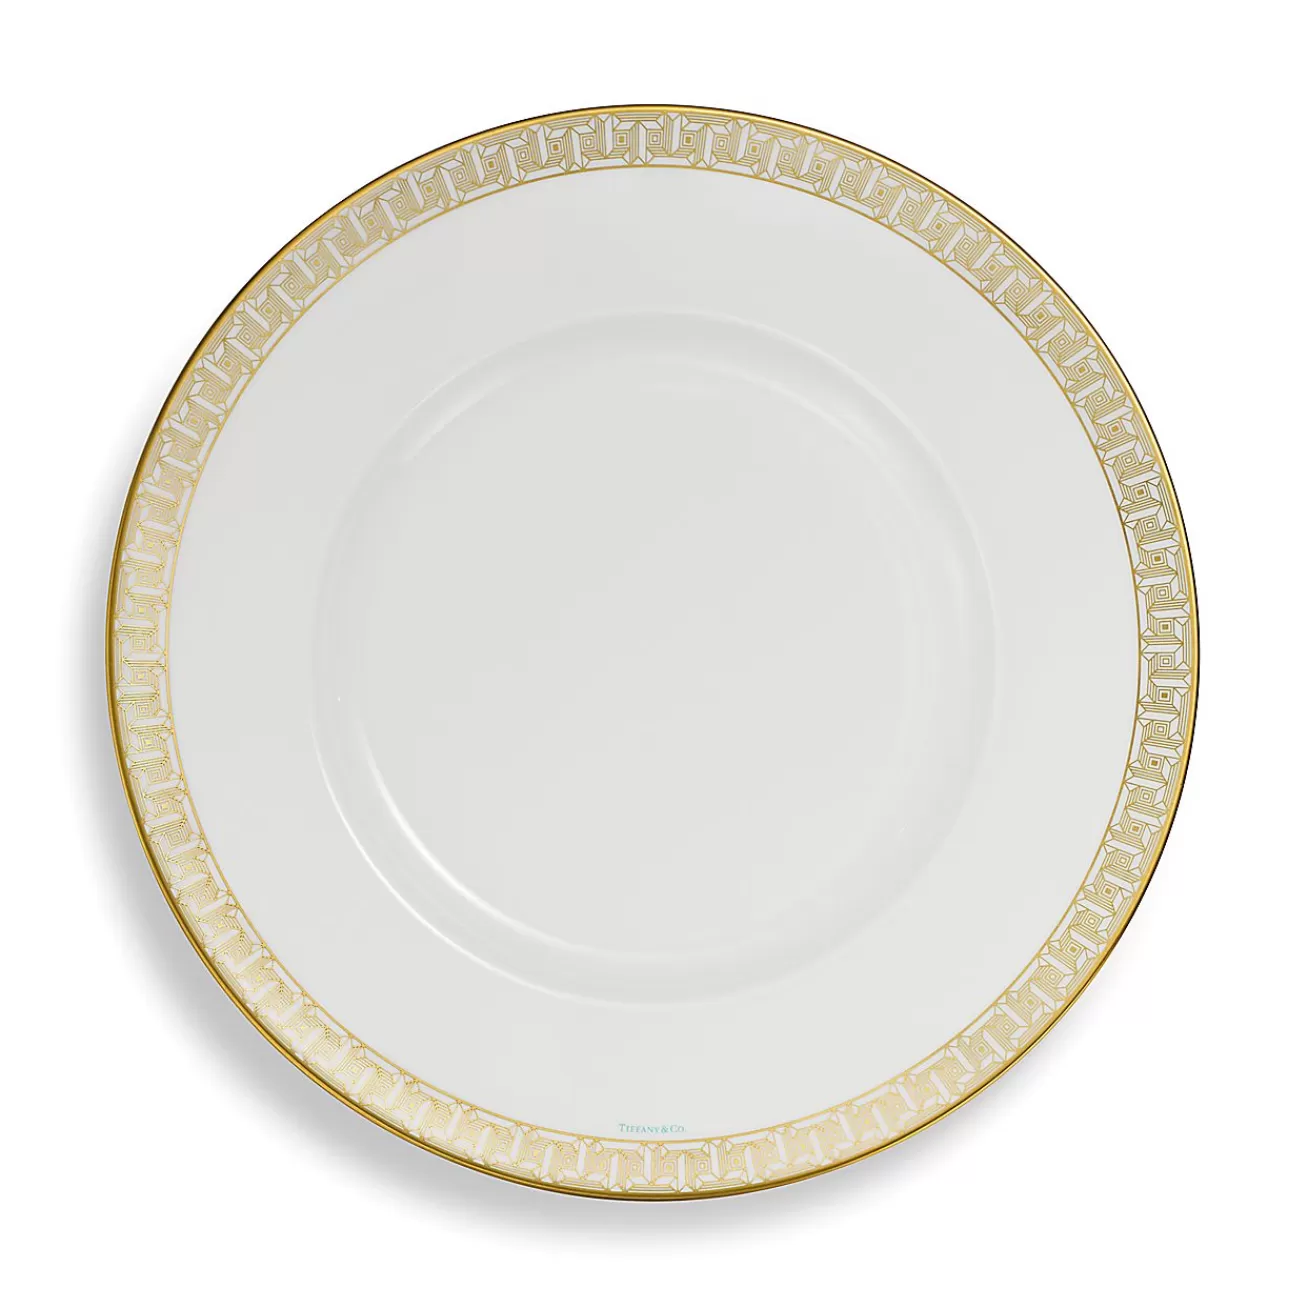 Tiffany & Co. Tiffany T True Charger with a Hand-painted Gold Rim | ^ Tableware